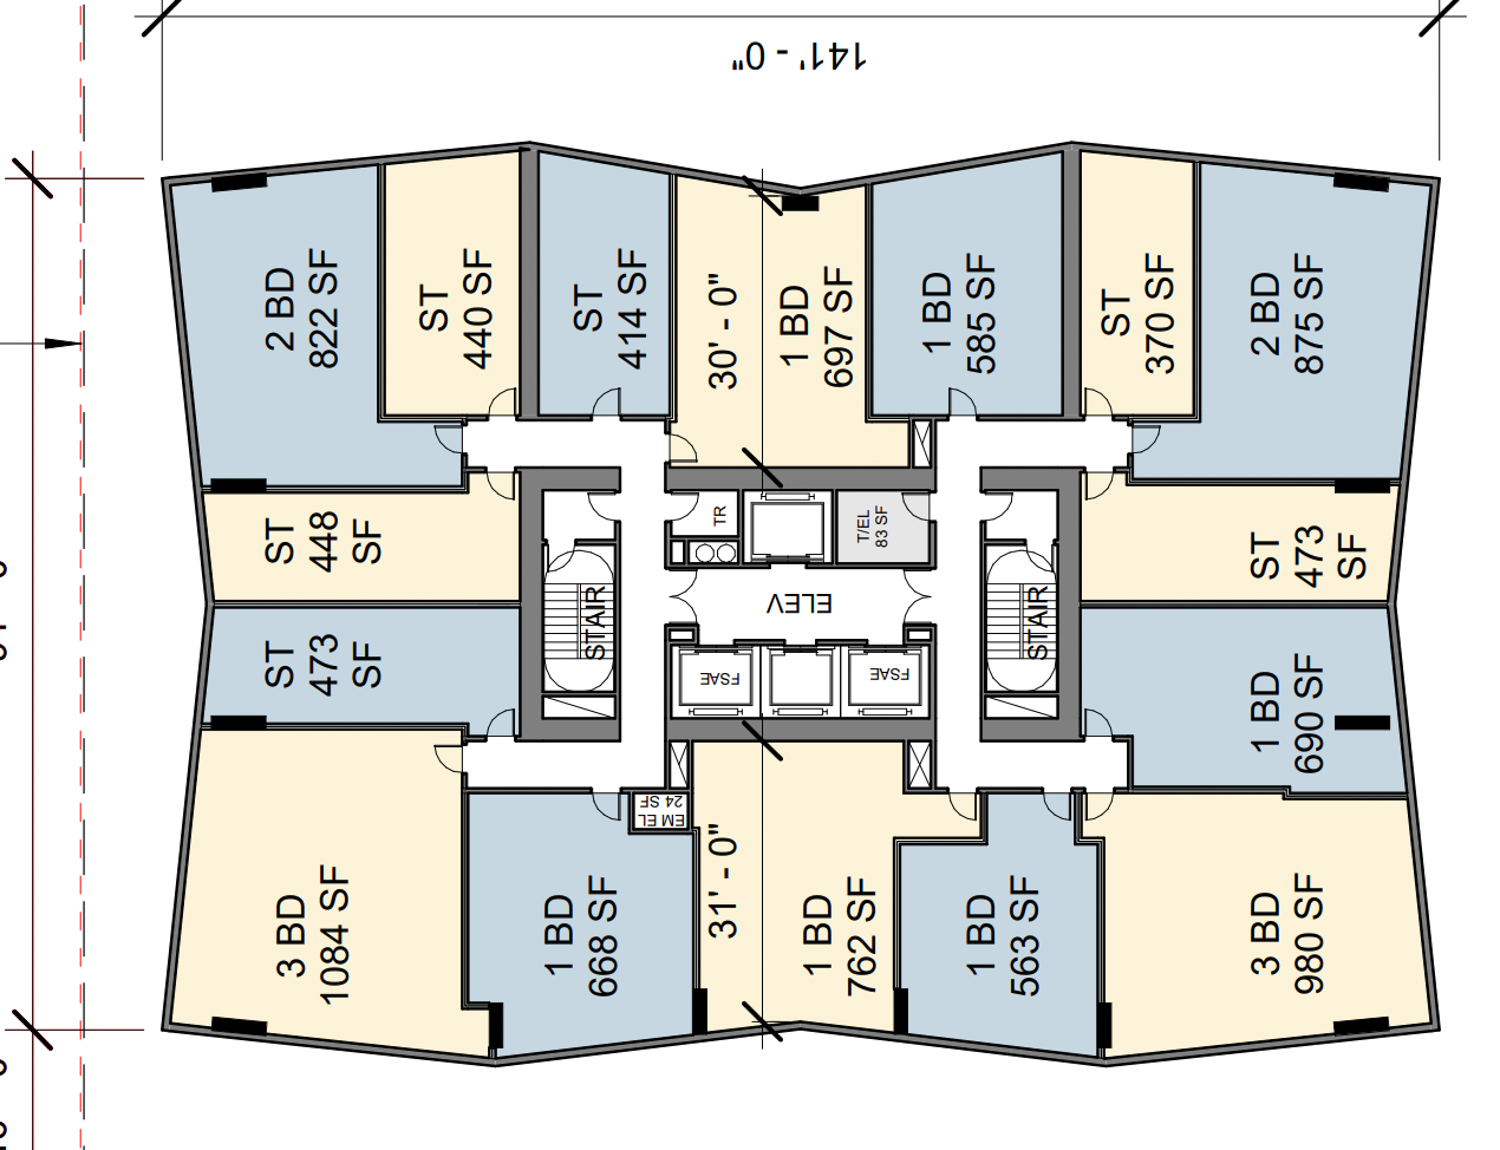 Floorplan typical between 14 and 47 at 30 Van Ness Avenue, drawing by Solomon Cordwell Buenz